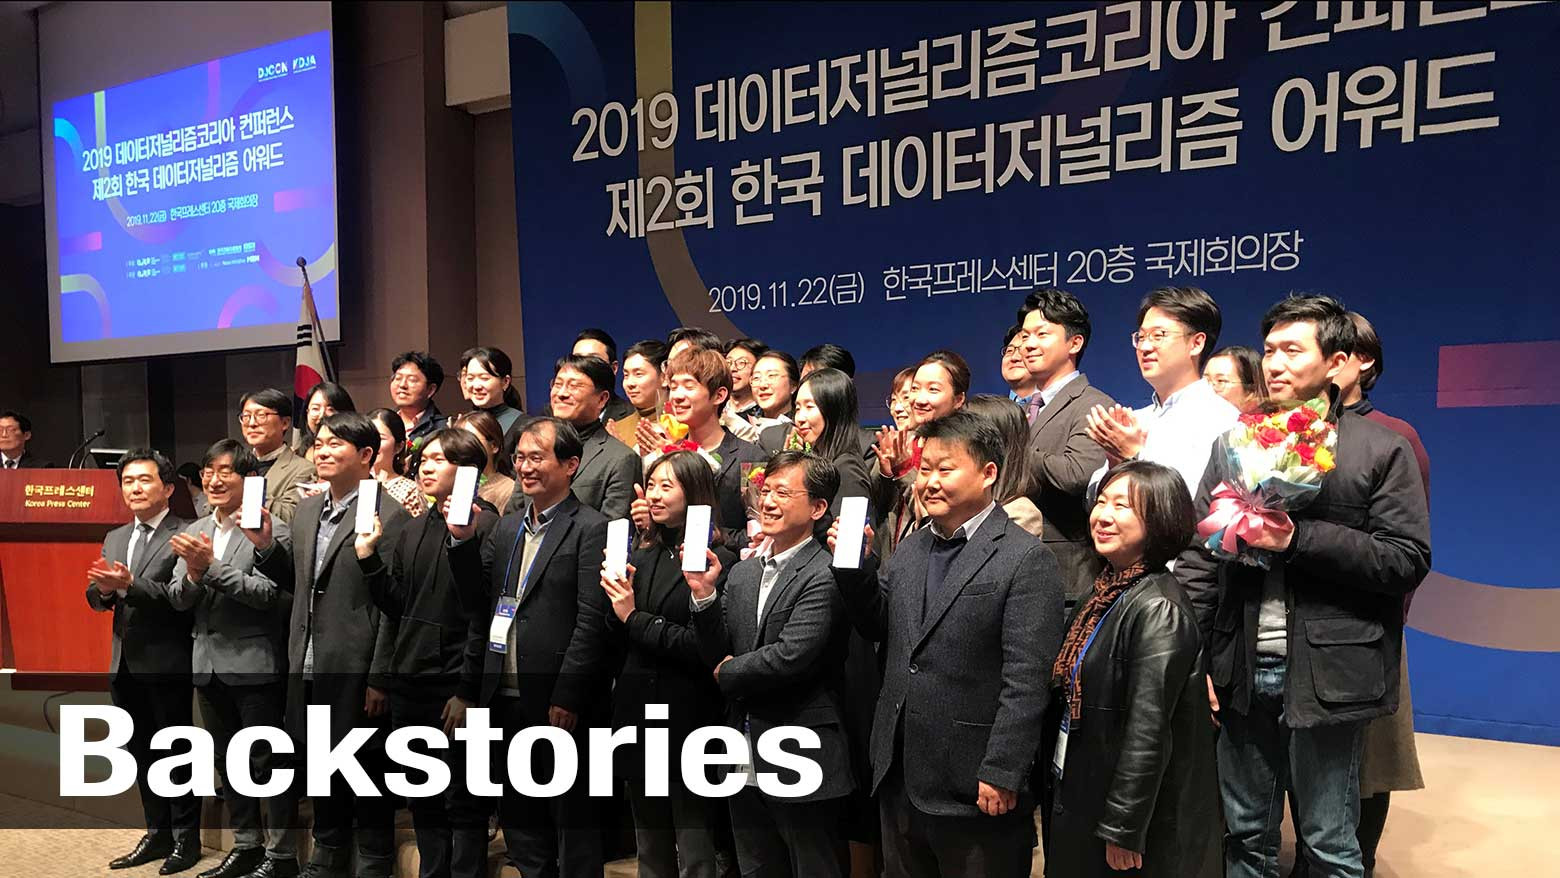 Data journalism is helping restore faith in media in South Korea